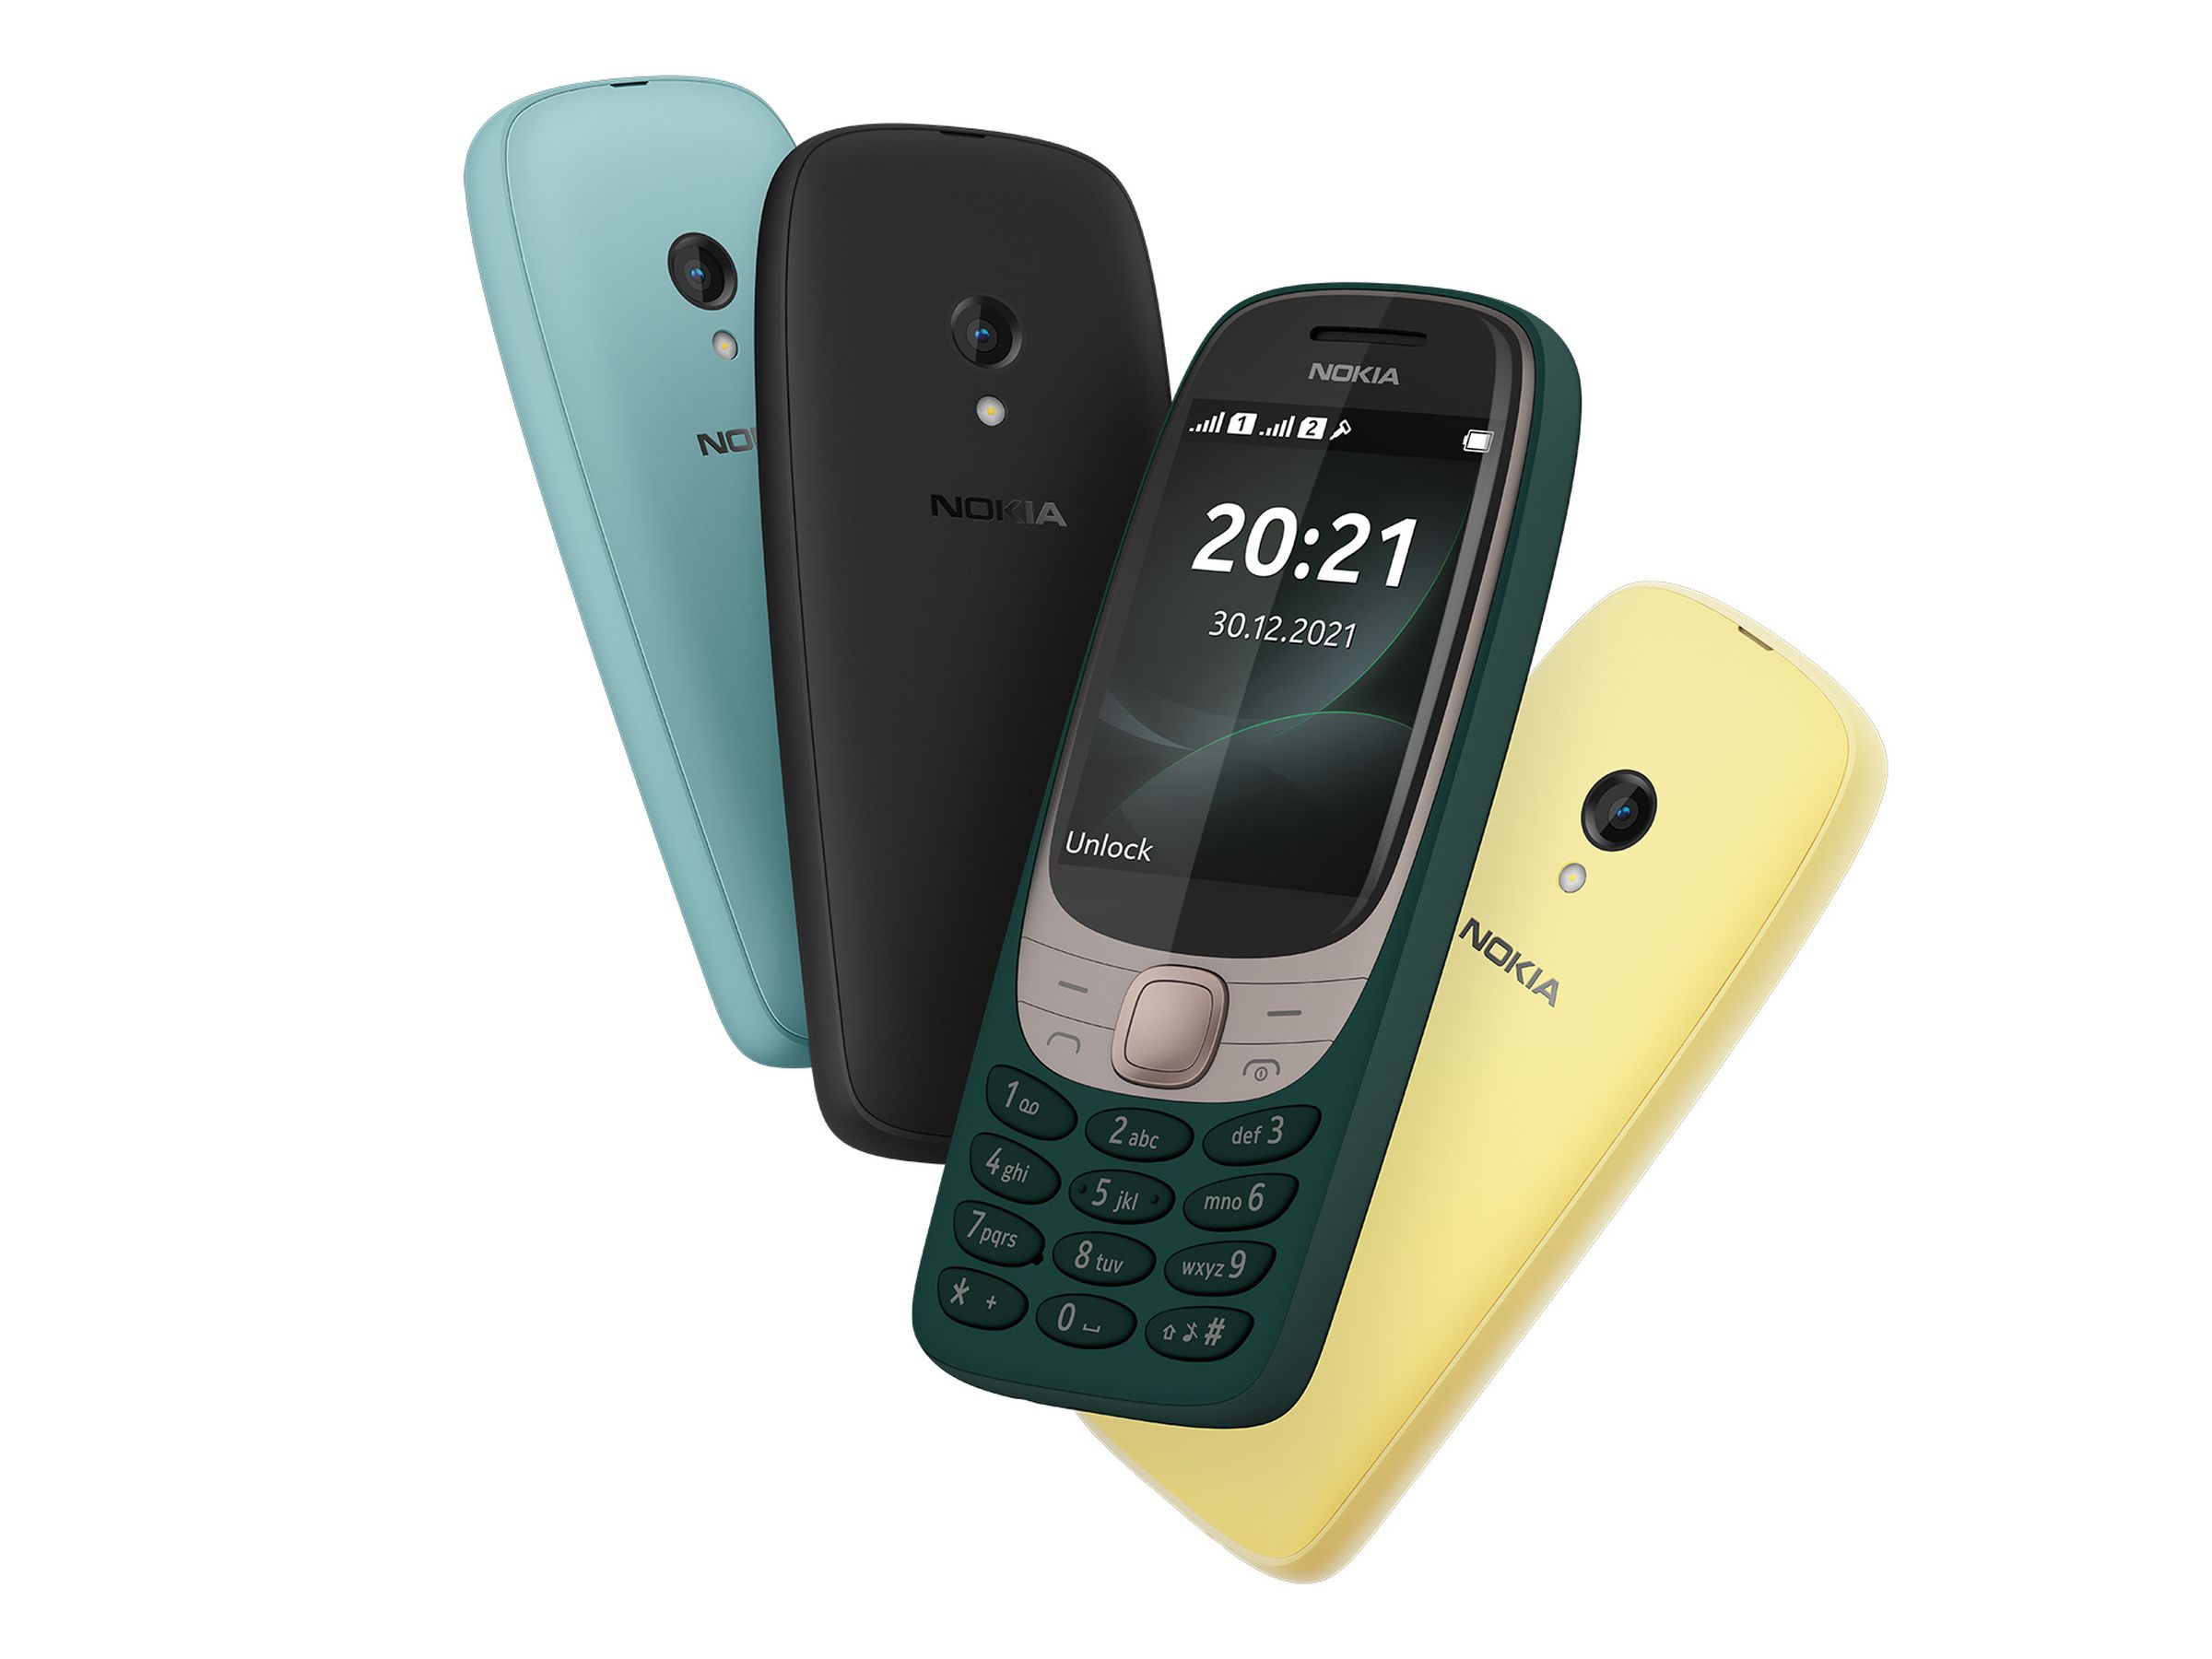 The Nokia 6310 features basic 2G connectivity and emphasizes accessibility. 